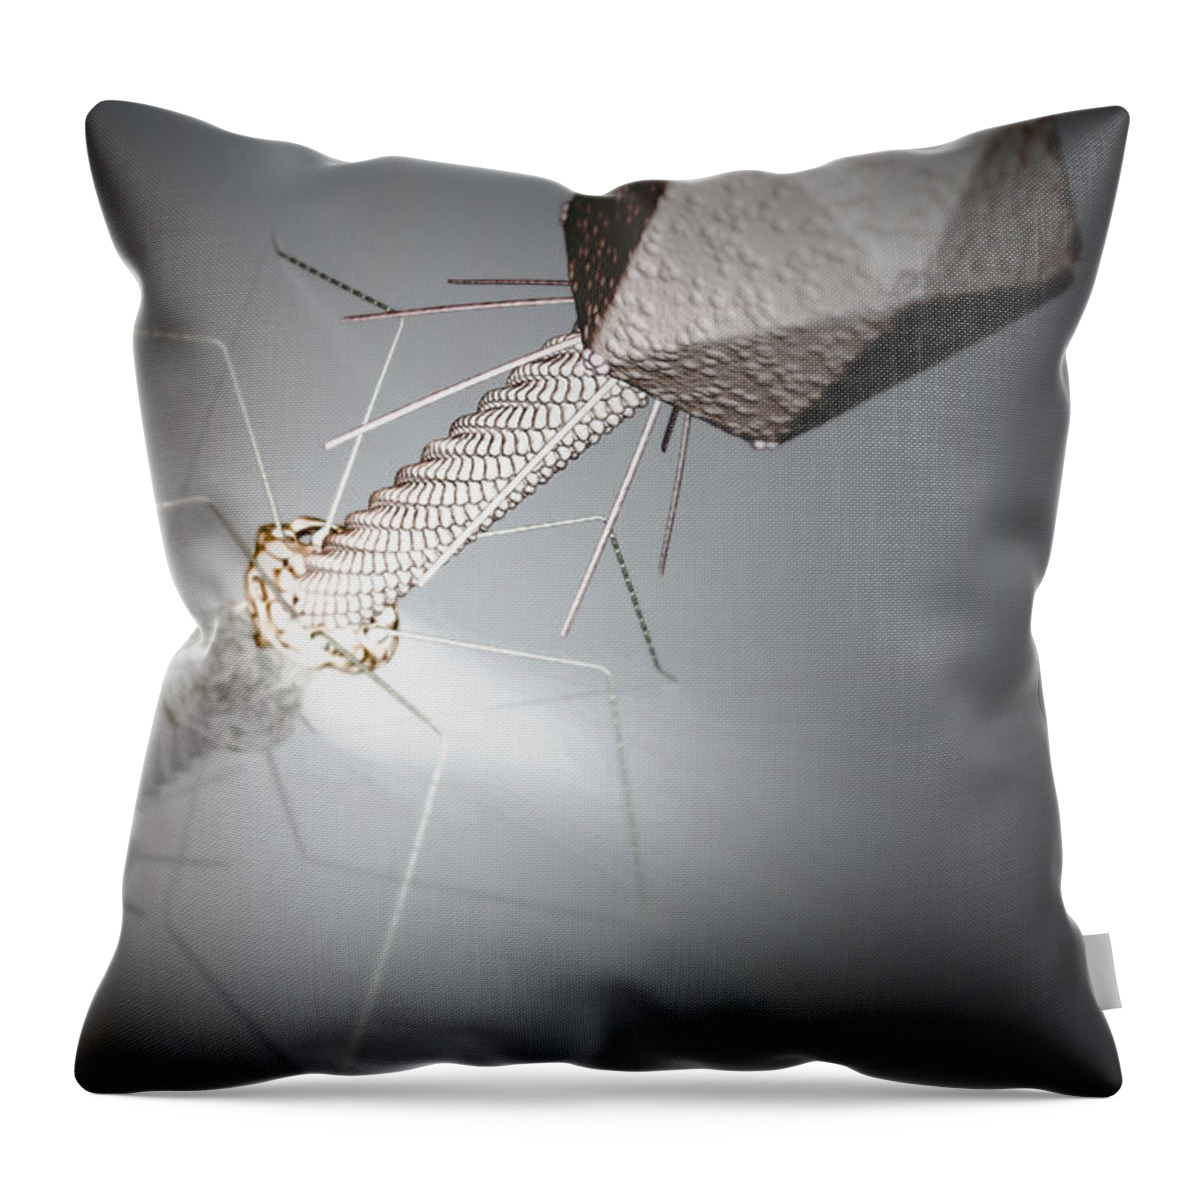 Infection Throw Pillow featuring the photograph Bacteriophage #1 by Science Picture Co